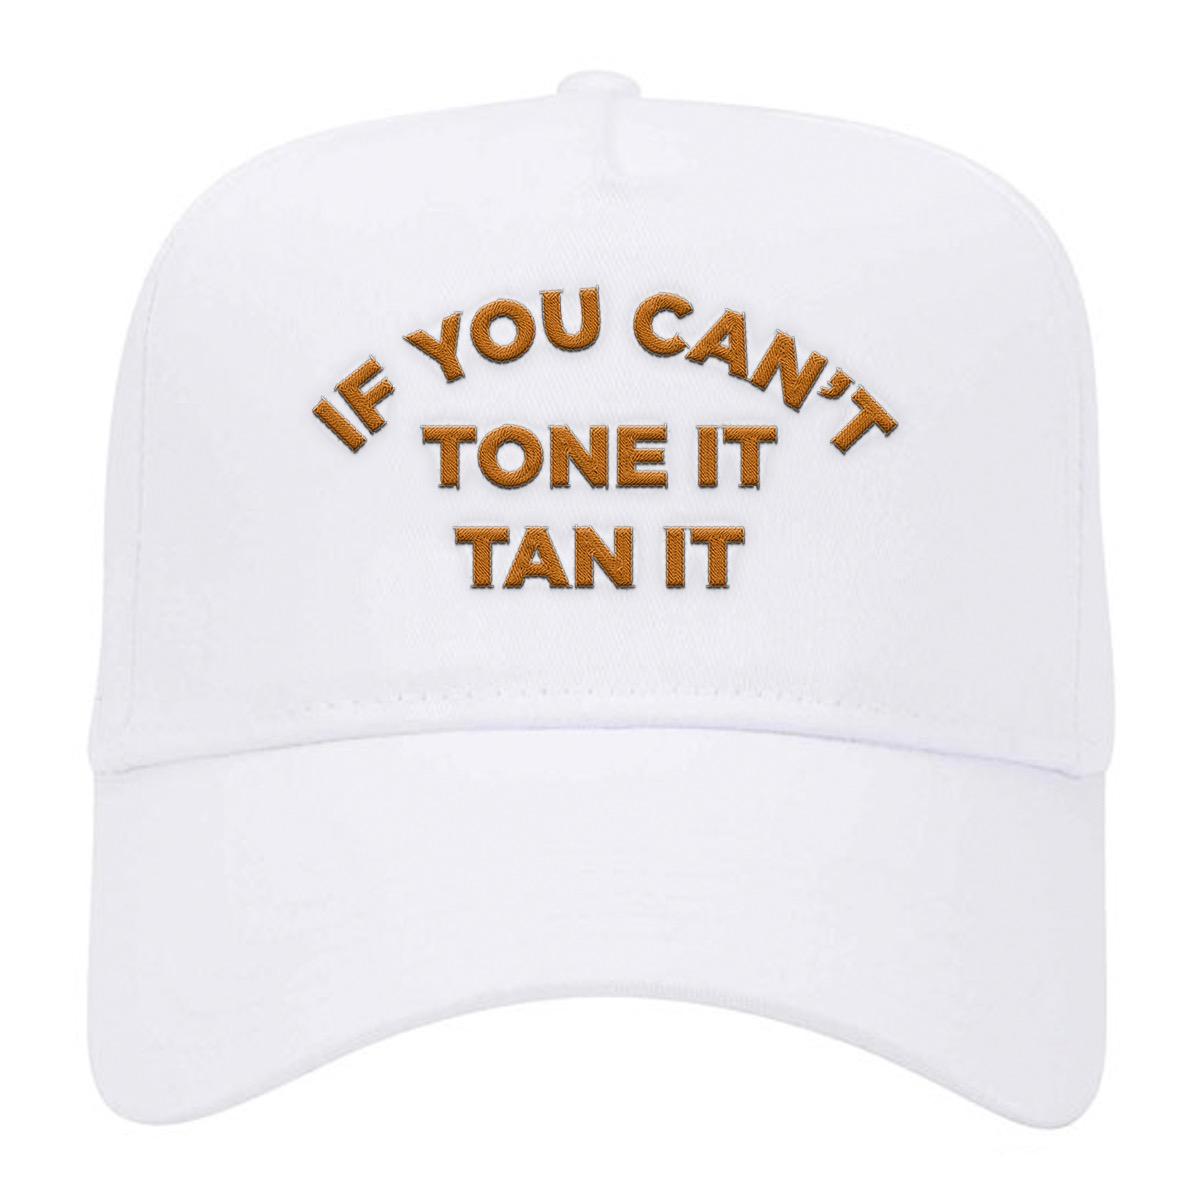 If You Can't Tone It Tan It Snapback Hat-Hats-Barstool Sports-White-One Size-Barstool Sports